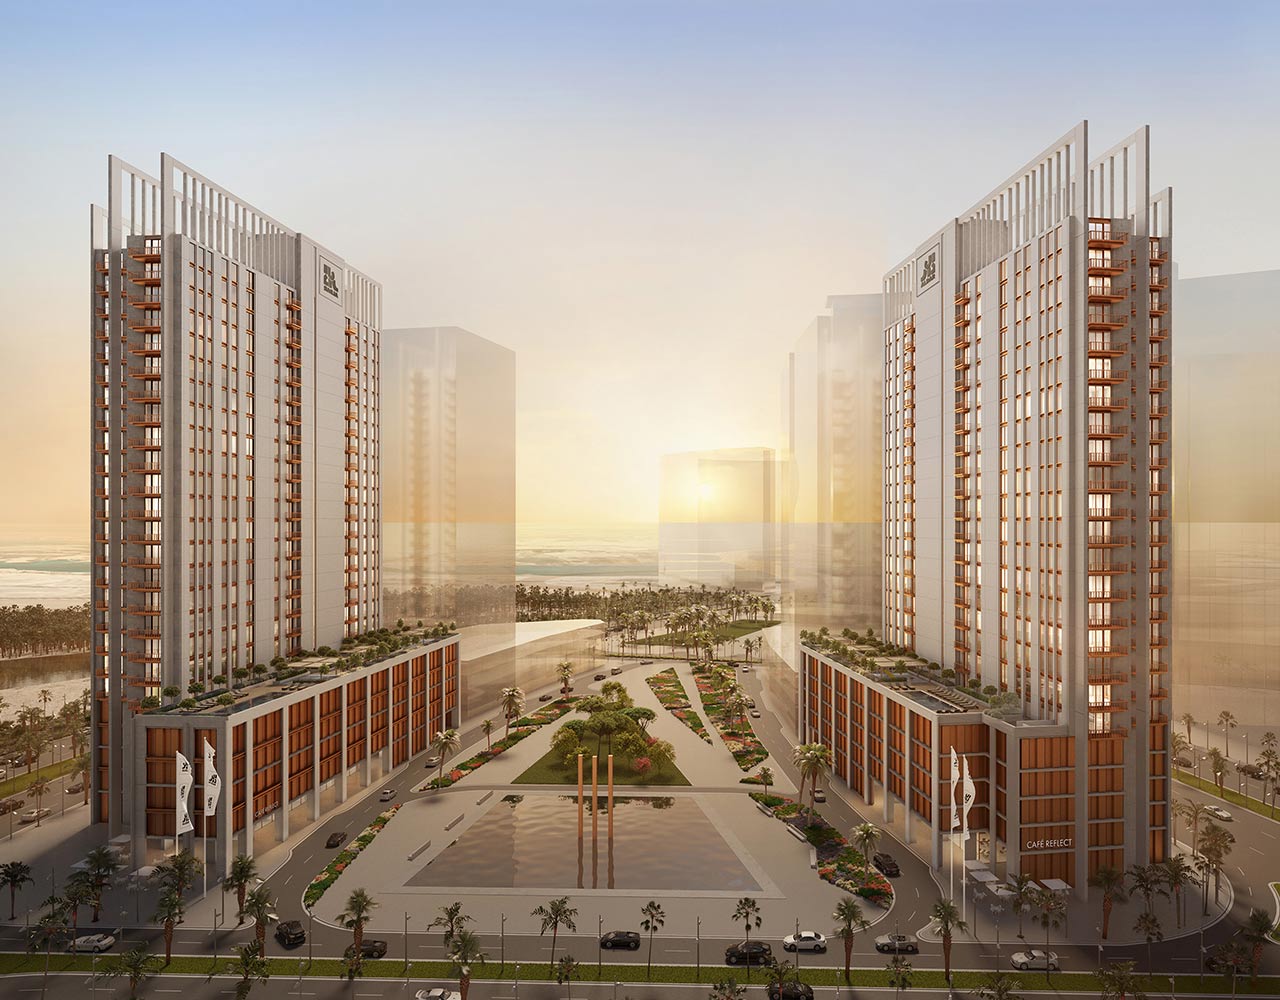 WME Complete design for Aldar’s latest Boutique Residential development “Reflection”, Abu Dhabi